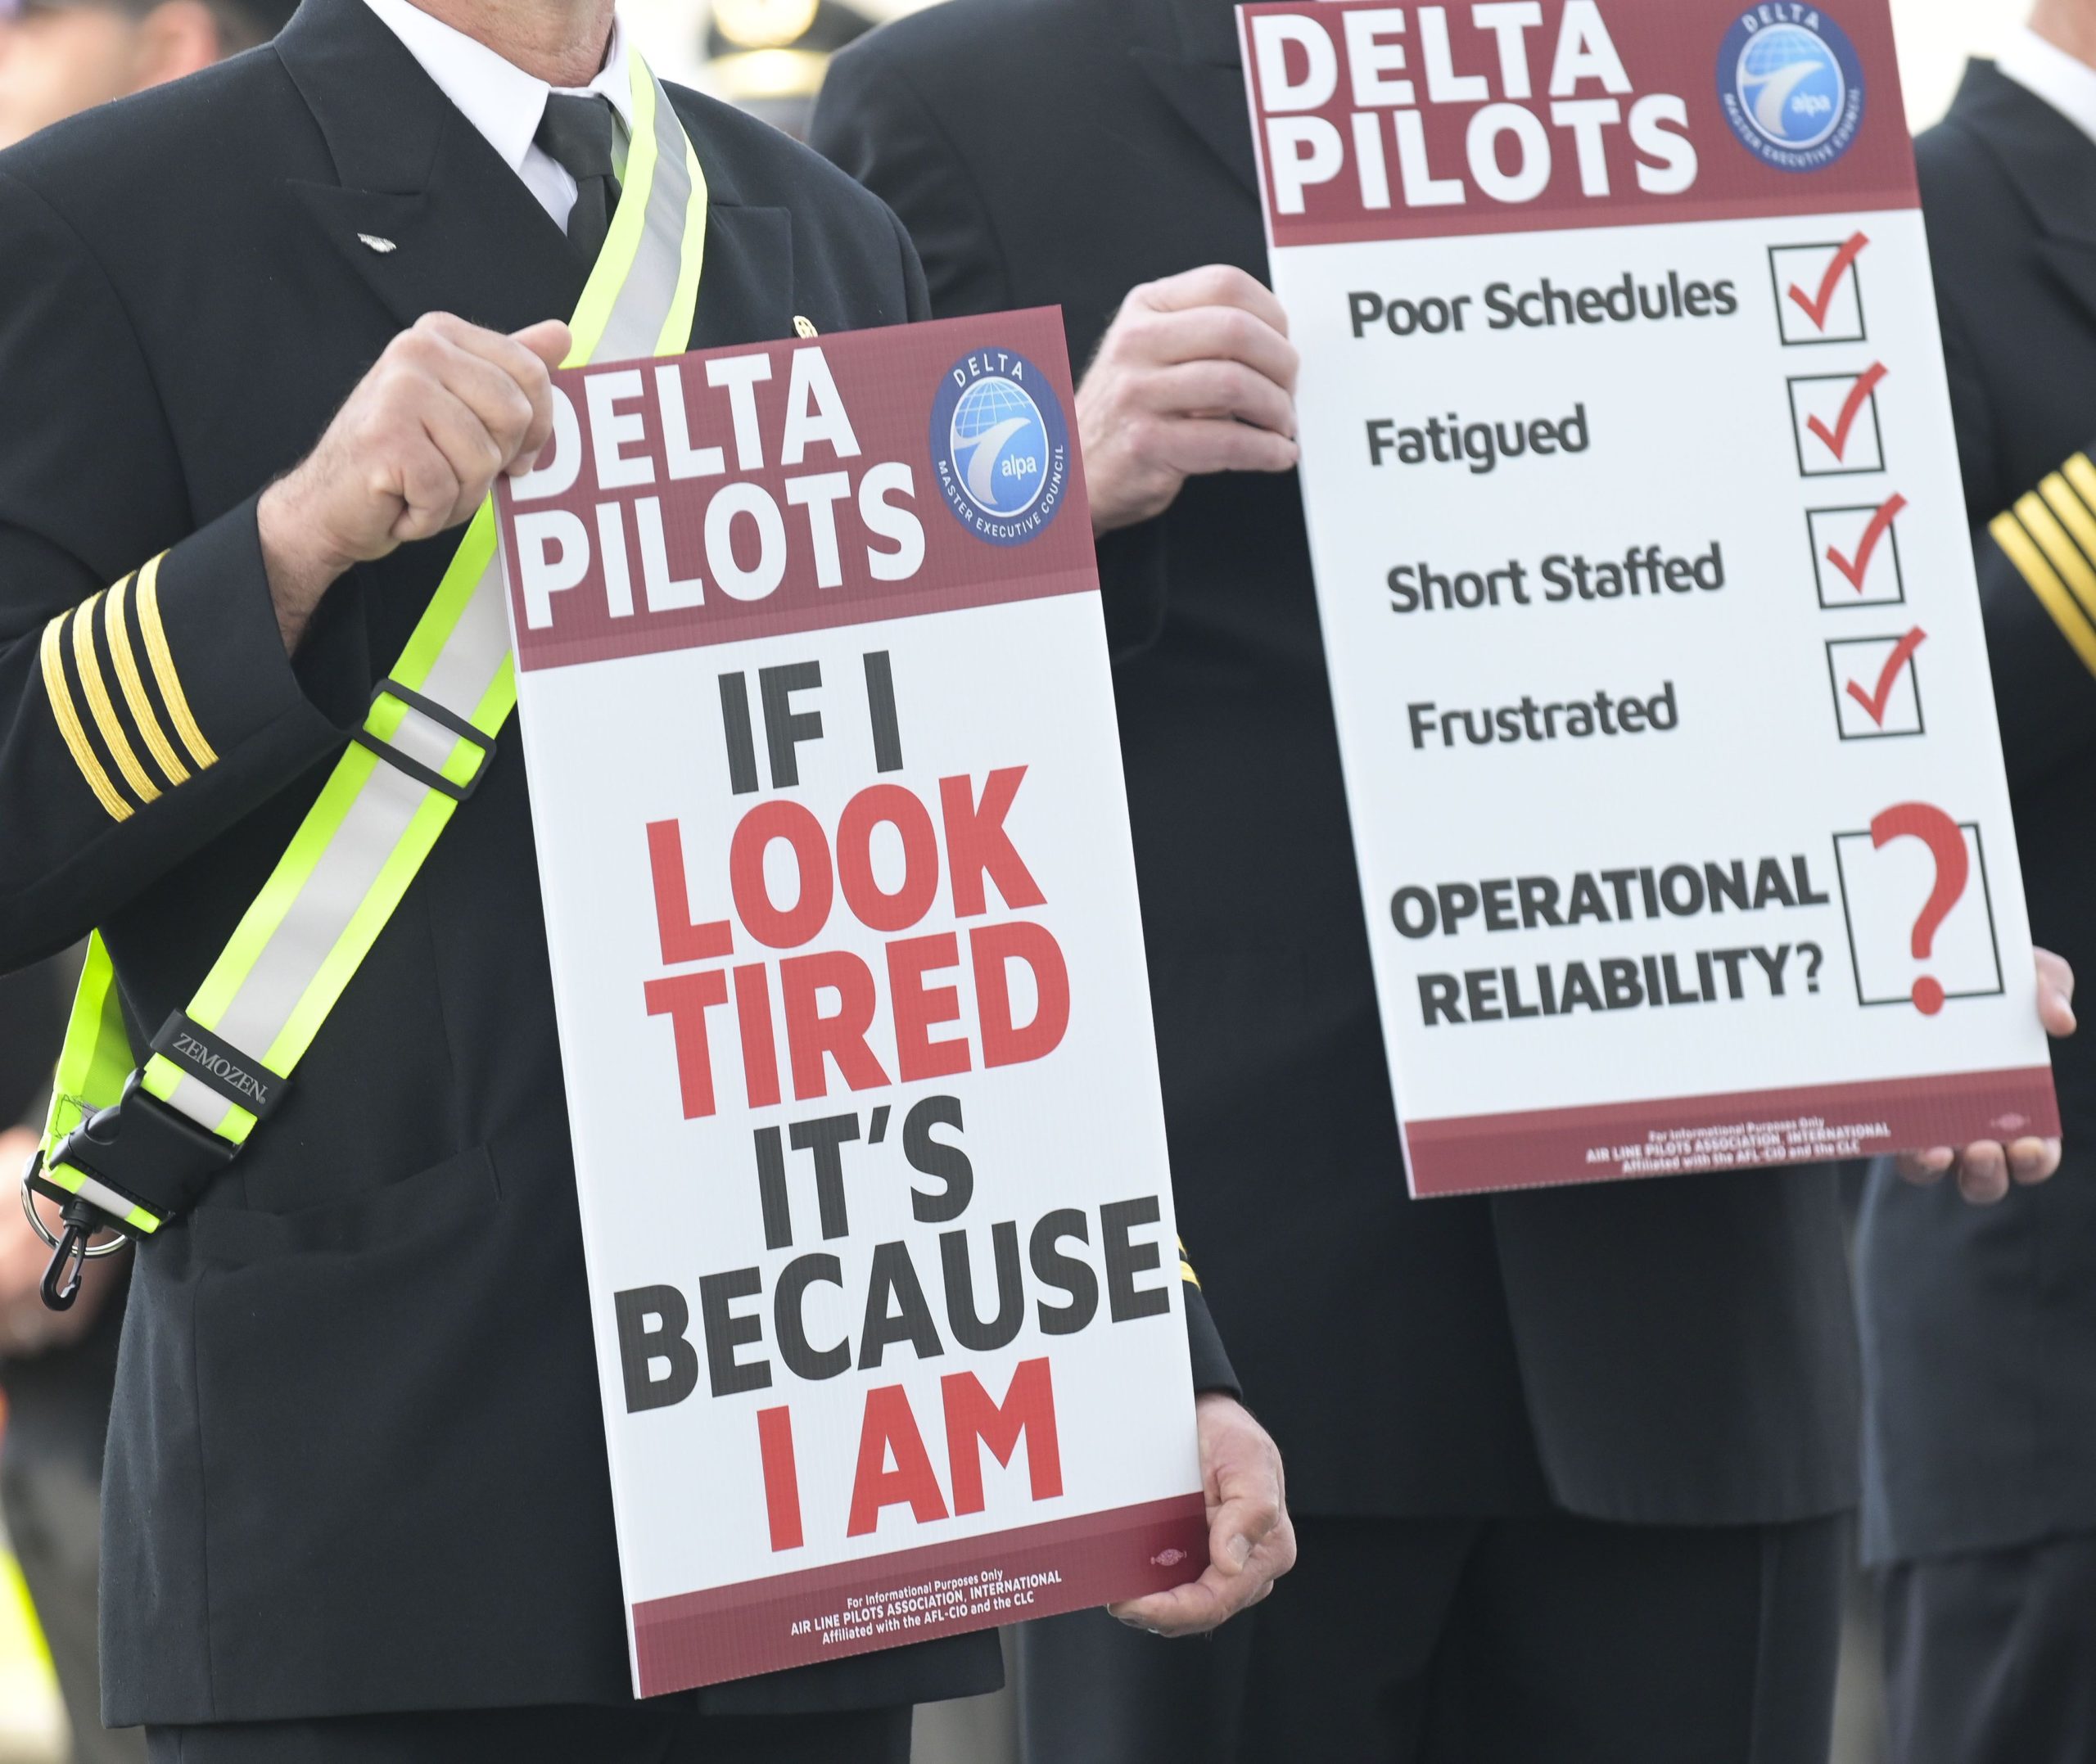 Pilots Are Claiming Exhaustion. Do We Really Want Them Flying Our Children?